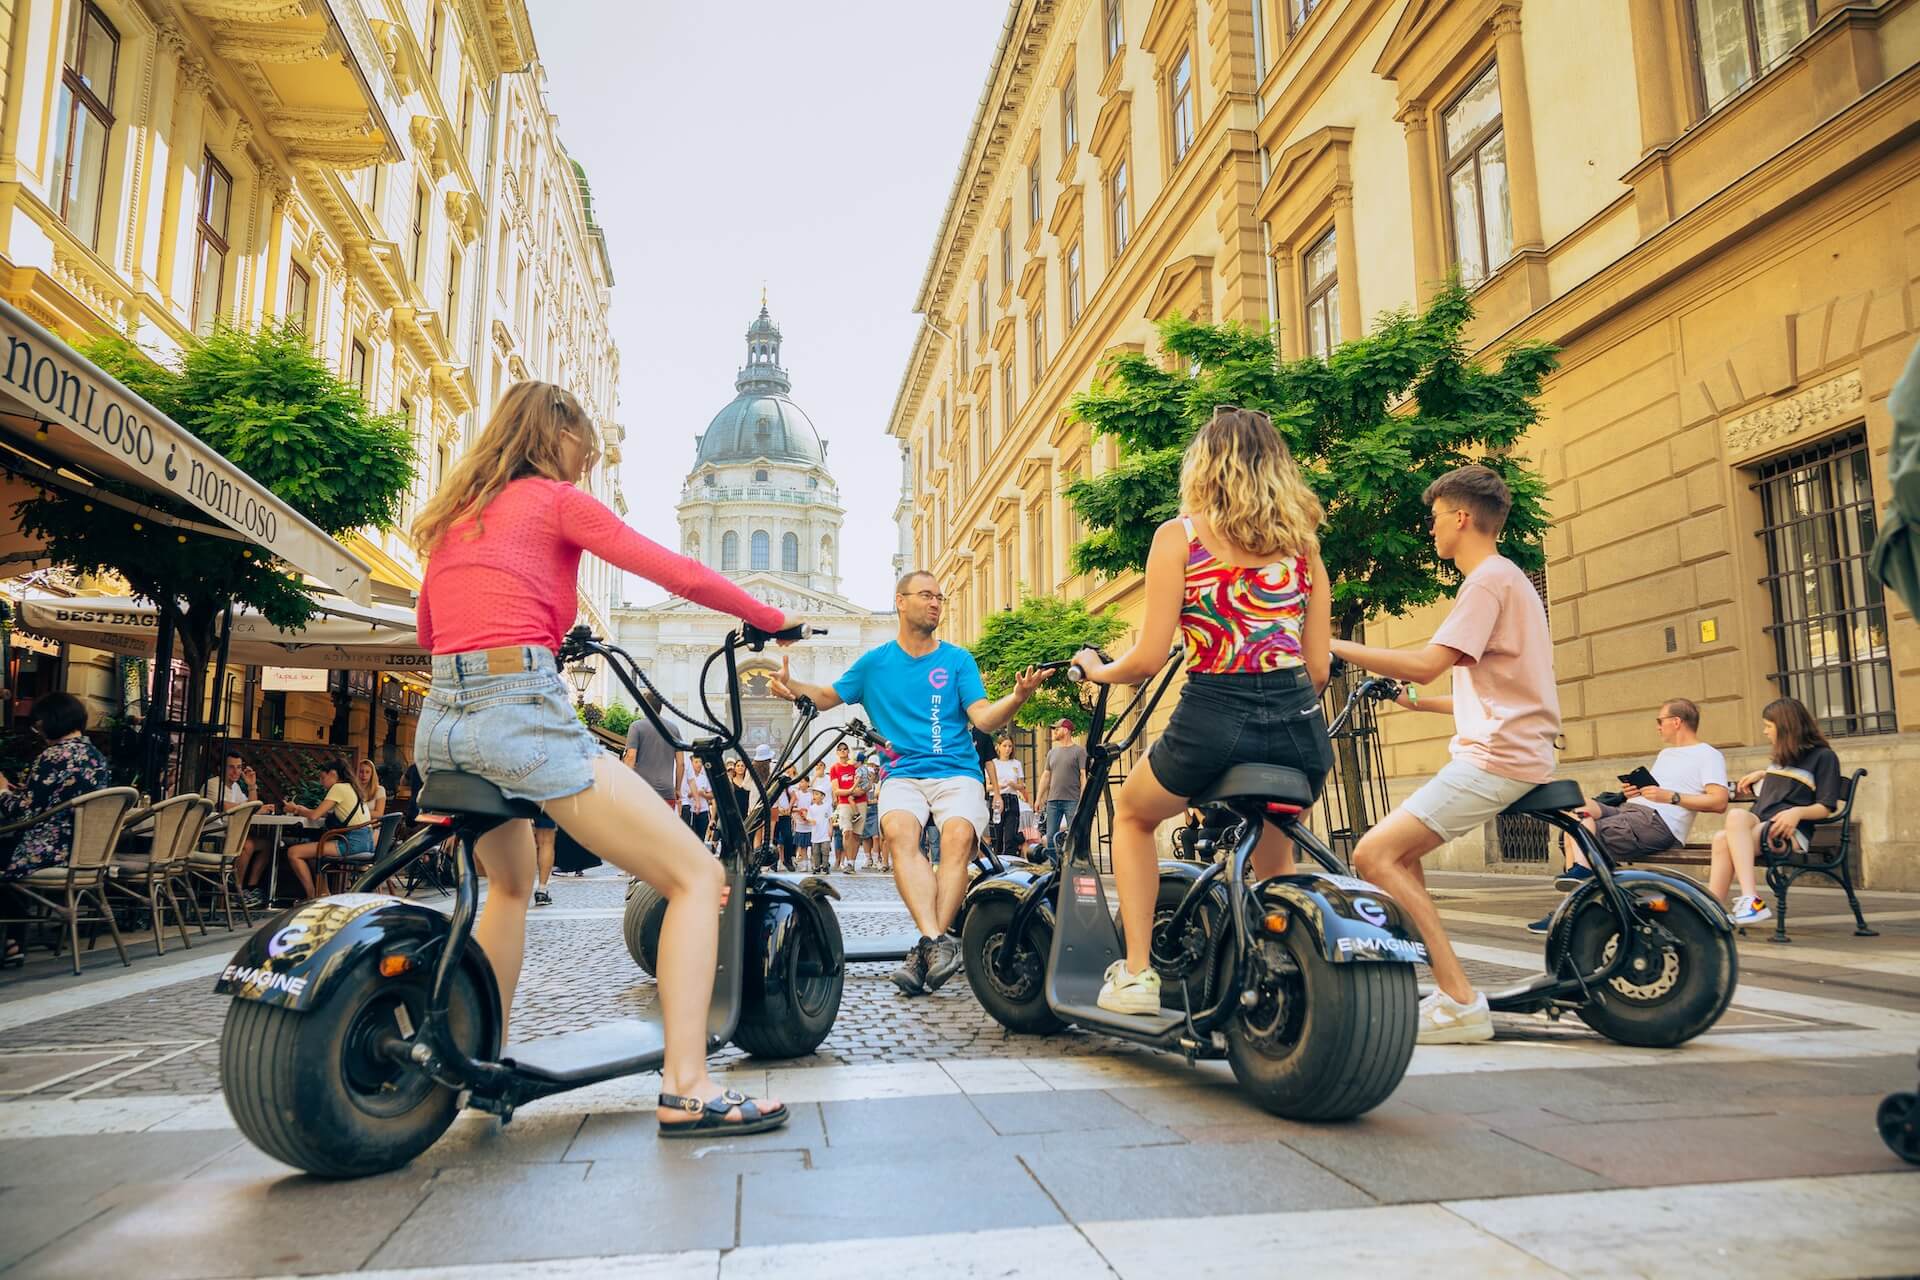 A Local guide tells stories about Budapest